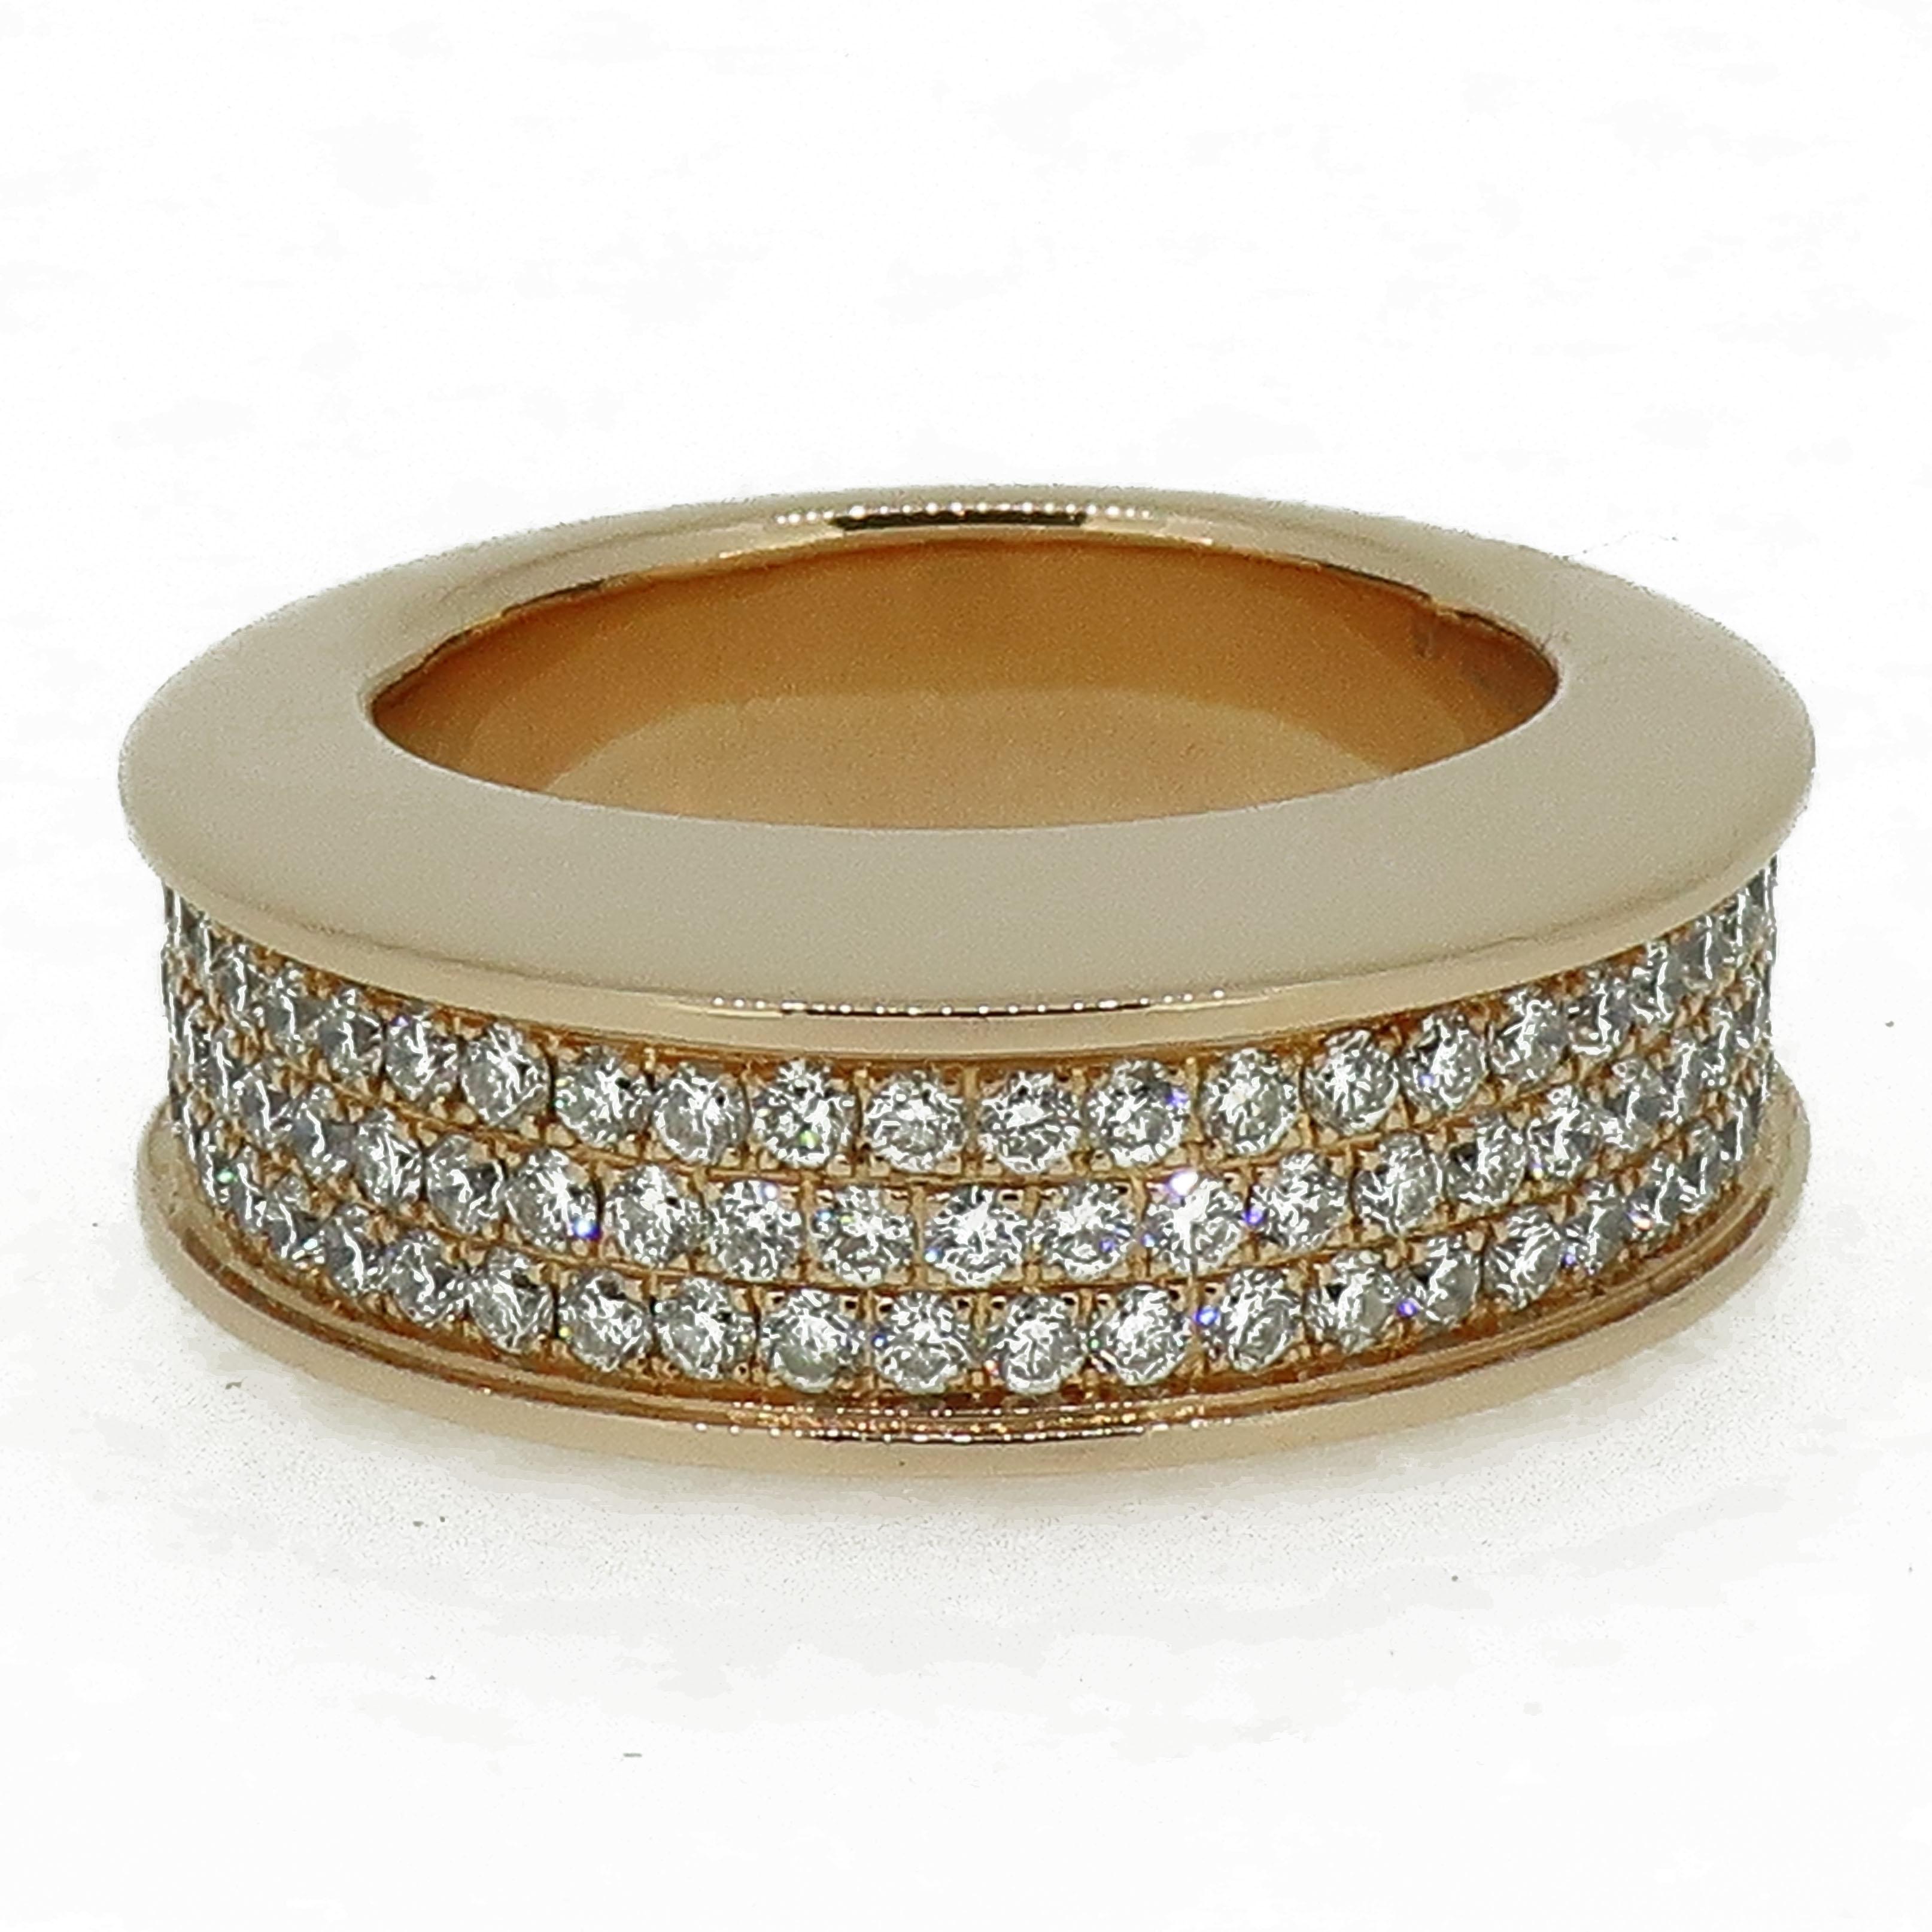 Pave Set Diamond Domed Ring 18 Karat Rose Gold 1.45 Carat

A stand out ring that features three rows of sparkling round brilliant diamonds in a micro-pave setting in a domed design, width of this impressive ring is 7.3mm. Solid gold and smoothed fit